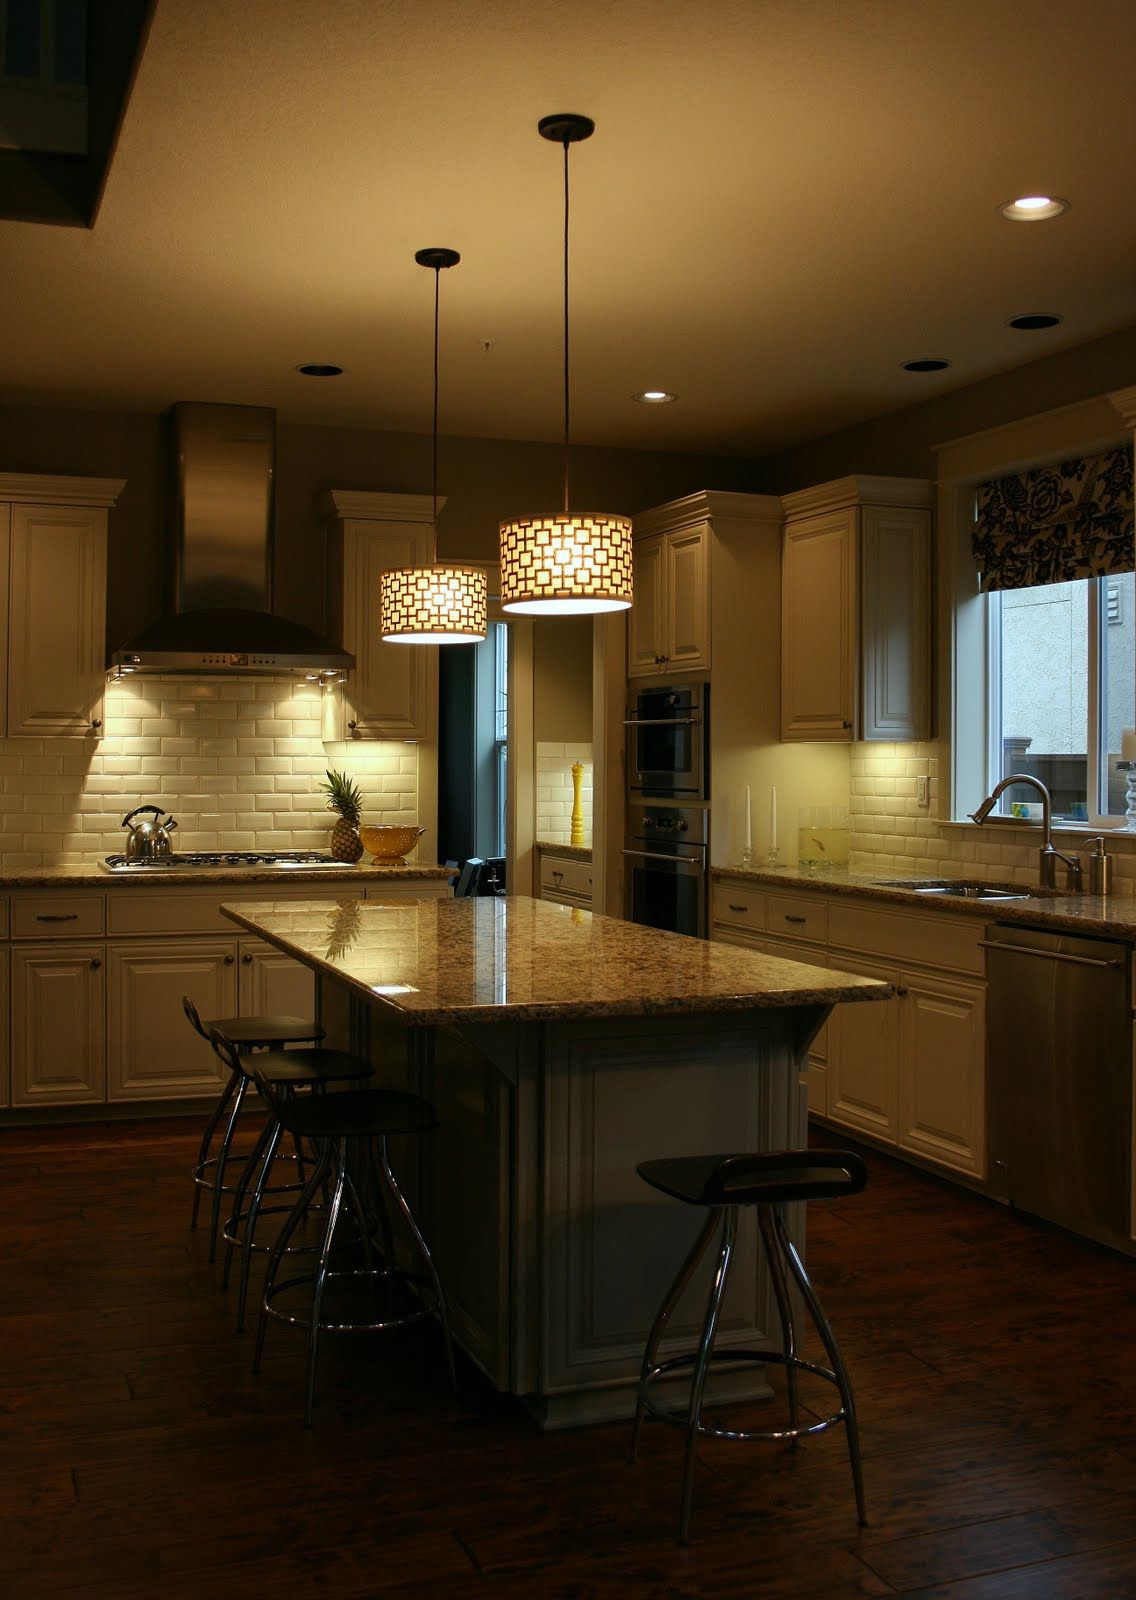 Kitchen Island Lighting System With Pendant And Chandelier Pertaining To Wood Kitchen Island Light Chandeliers (View 9 of 15)